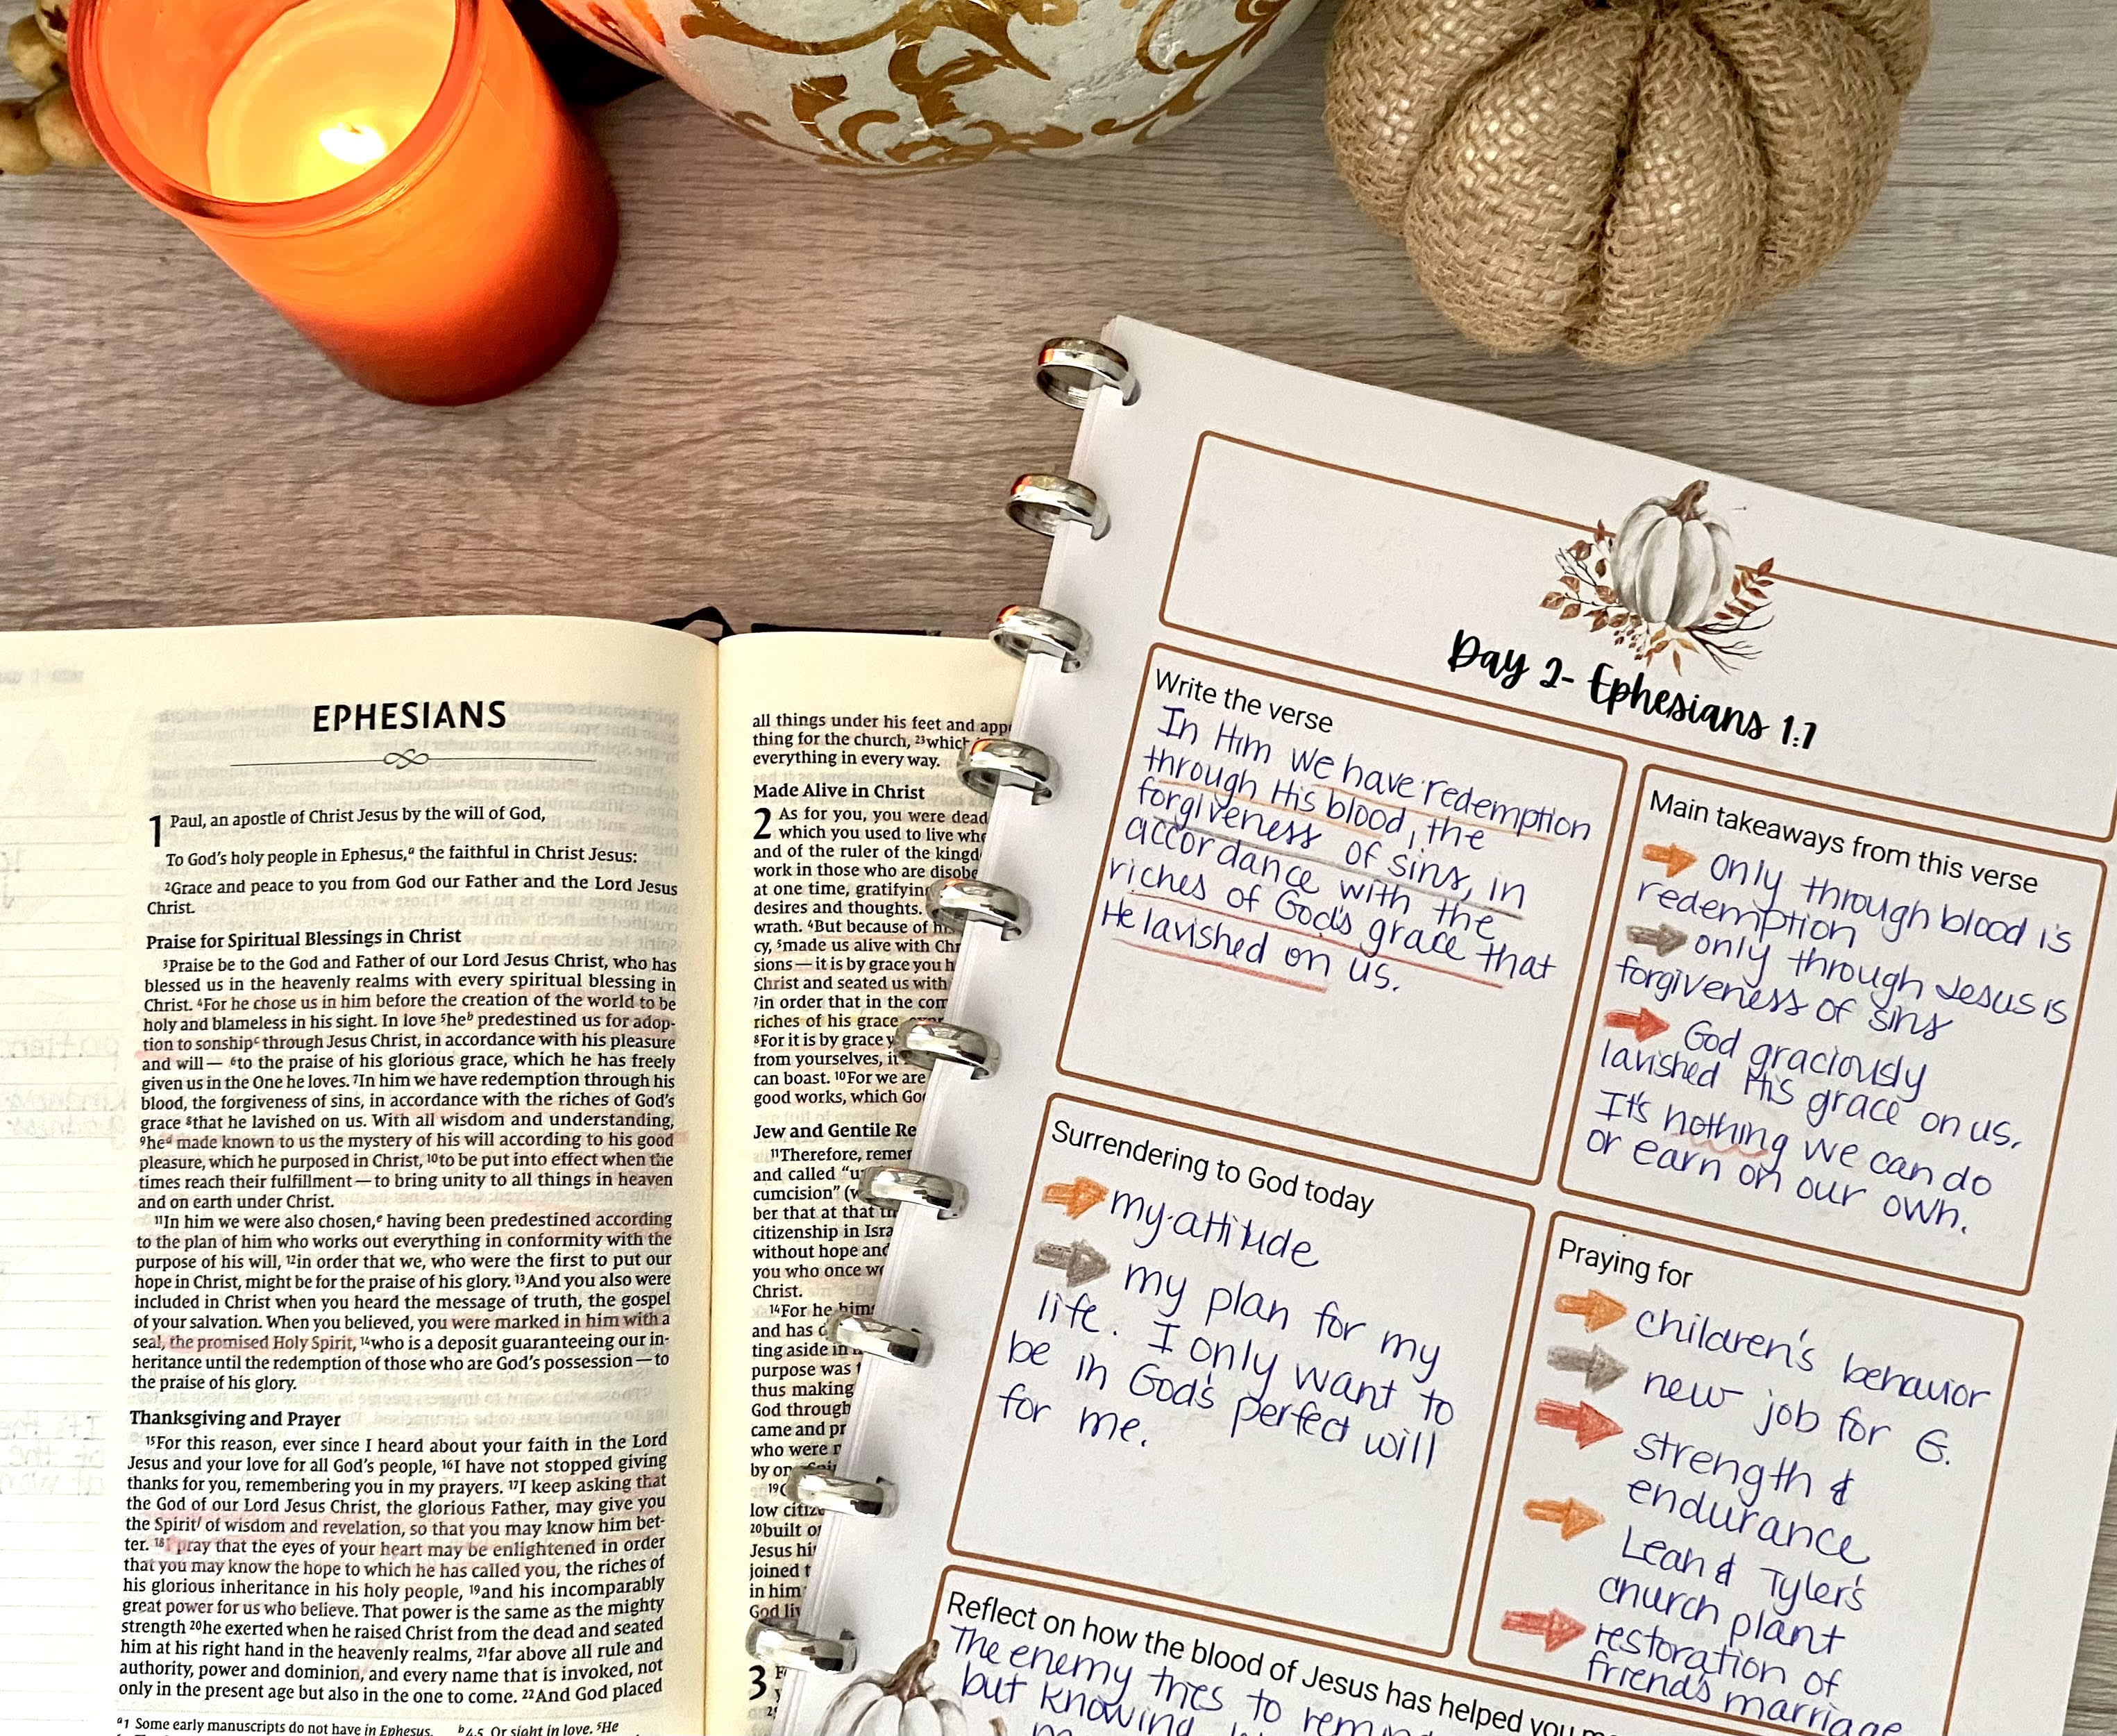 A Season of Prayer and Praise Scripture Writing and Gratitude Journal